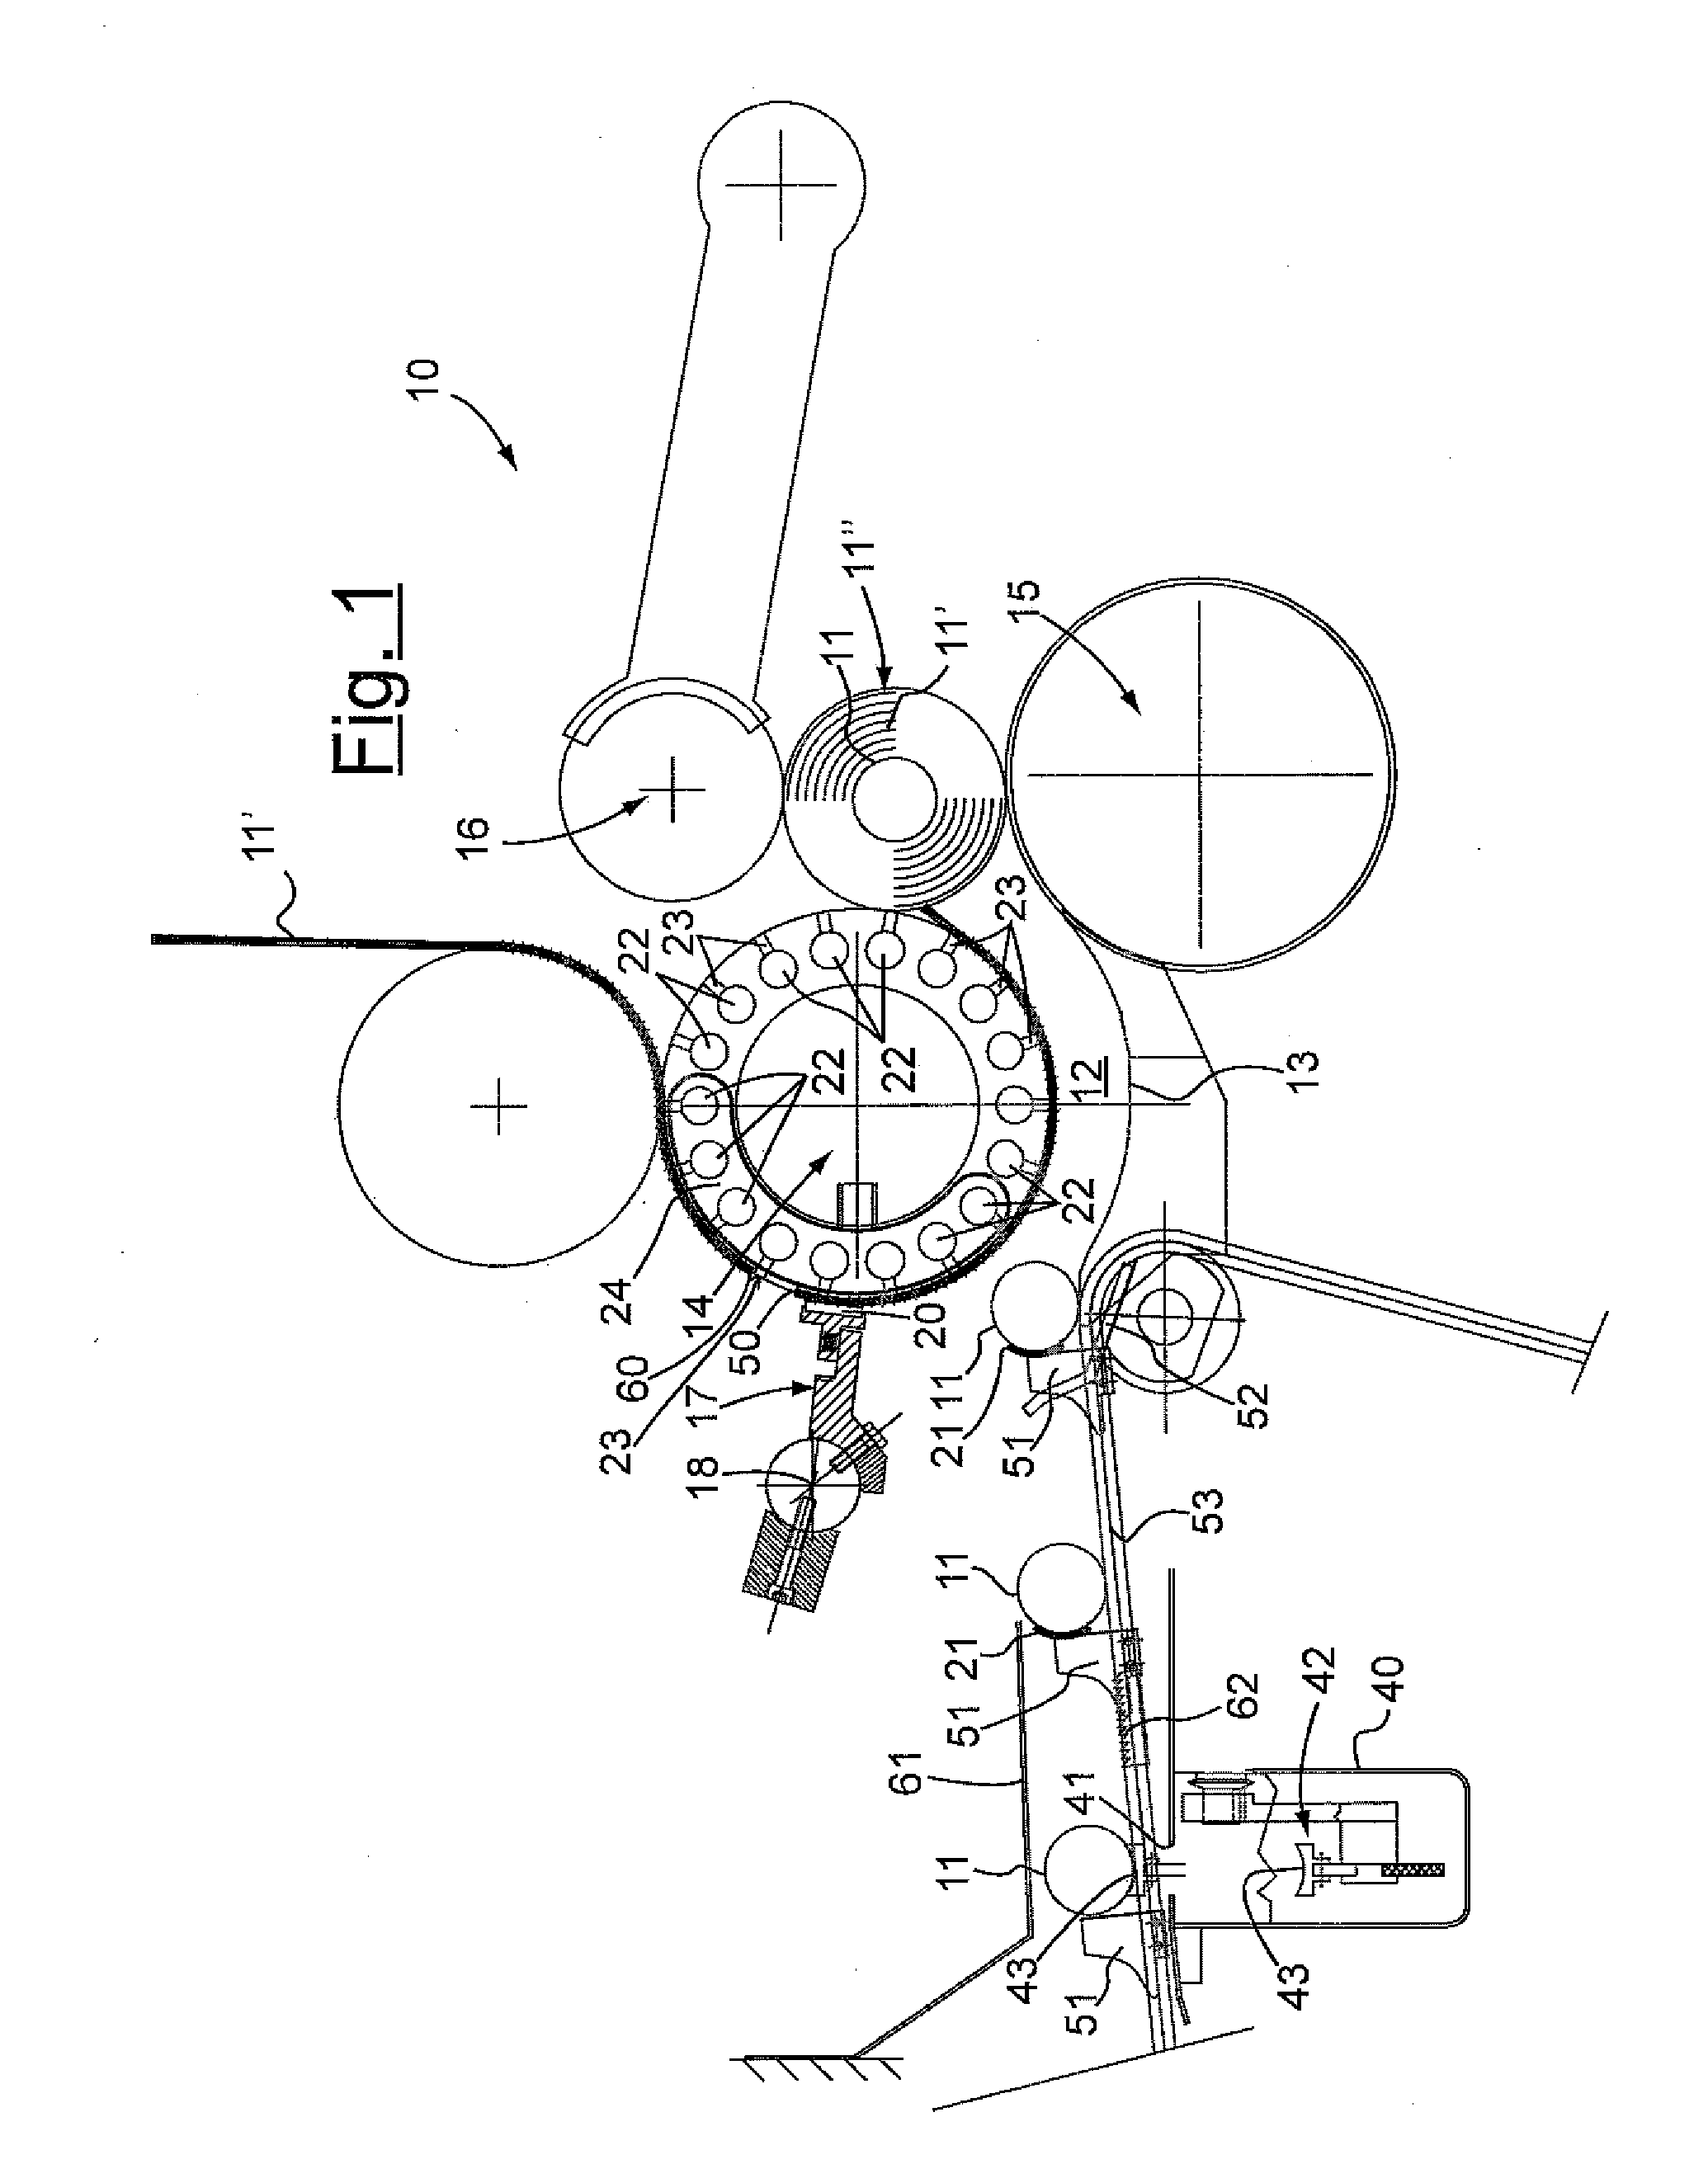 Winding group and method for winding paper around a core to make a log